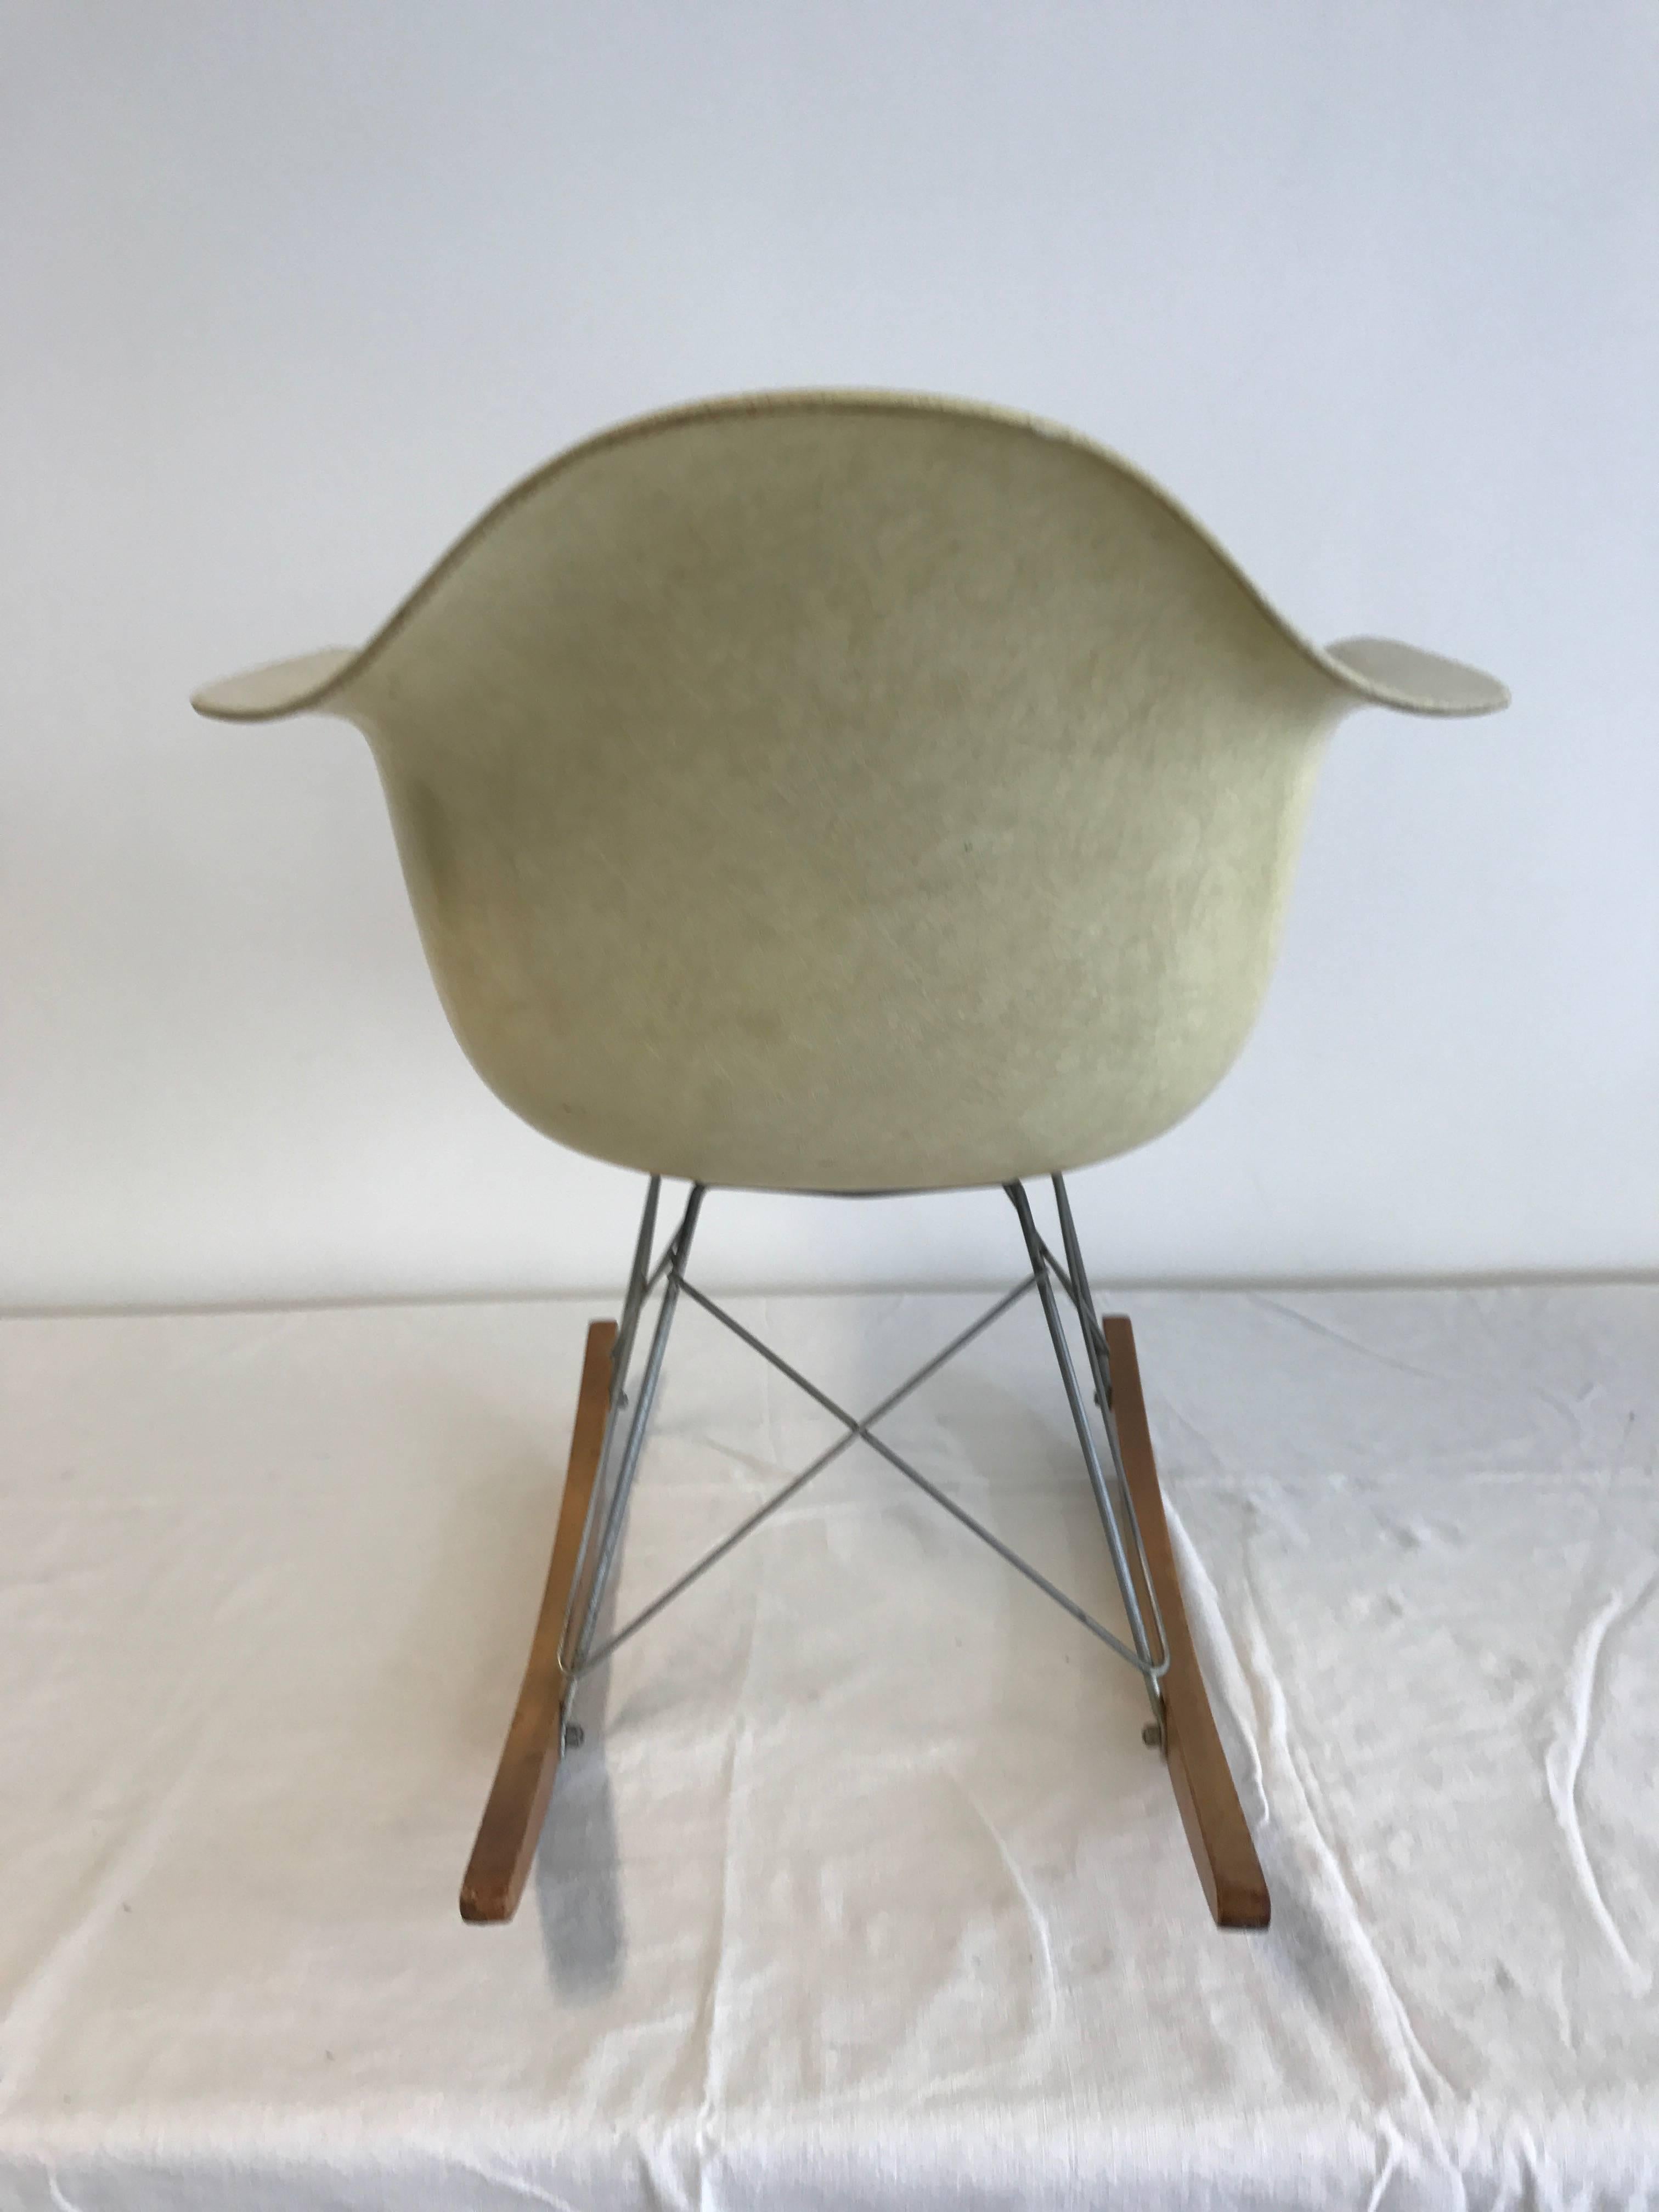 Early production Charles Eames rocker with rope edged fibre glass shell, zinc Eiffel tower base and wood rockers wood birch, original label, first production, first generation 1949-1950 Zenith Herman Miller, in color lemon yellow parchment, all